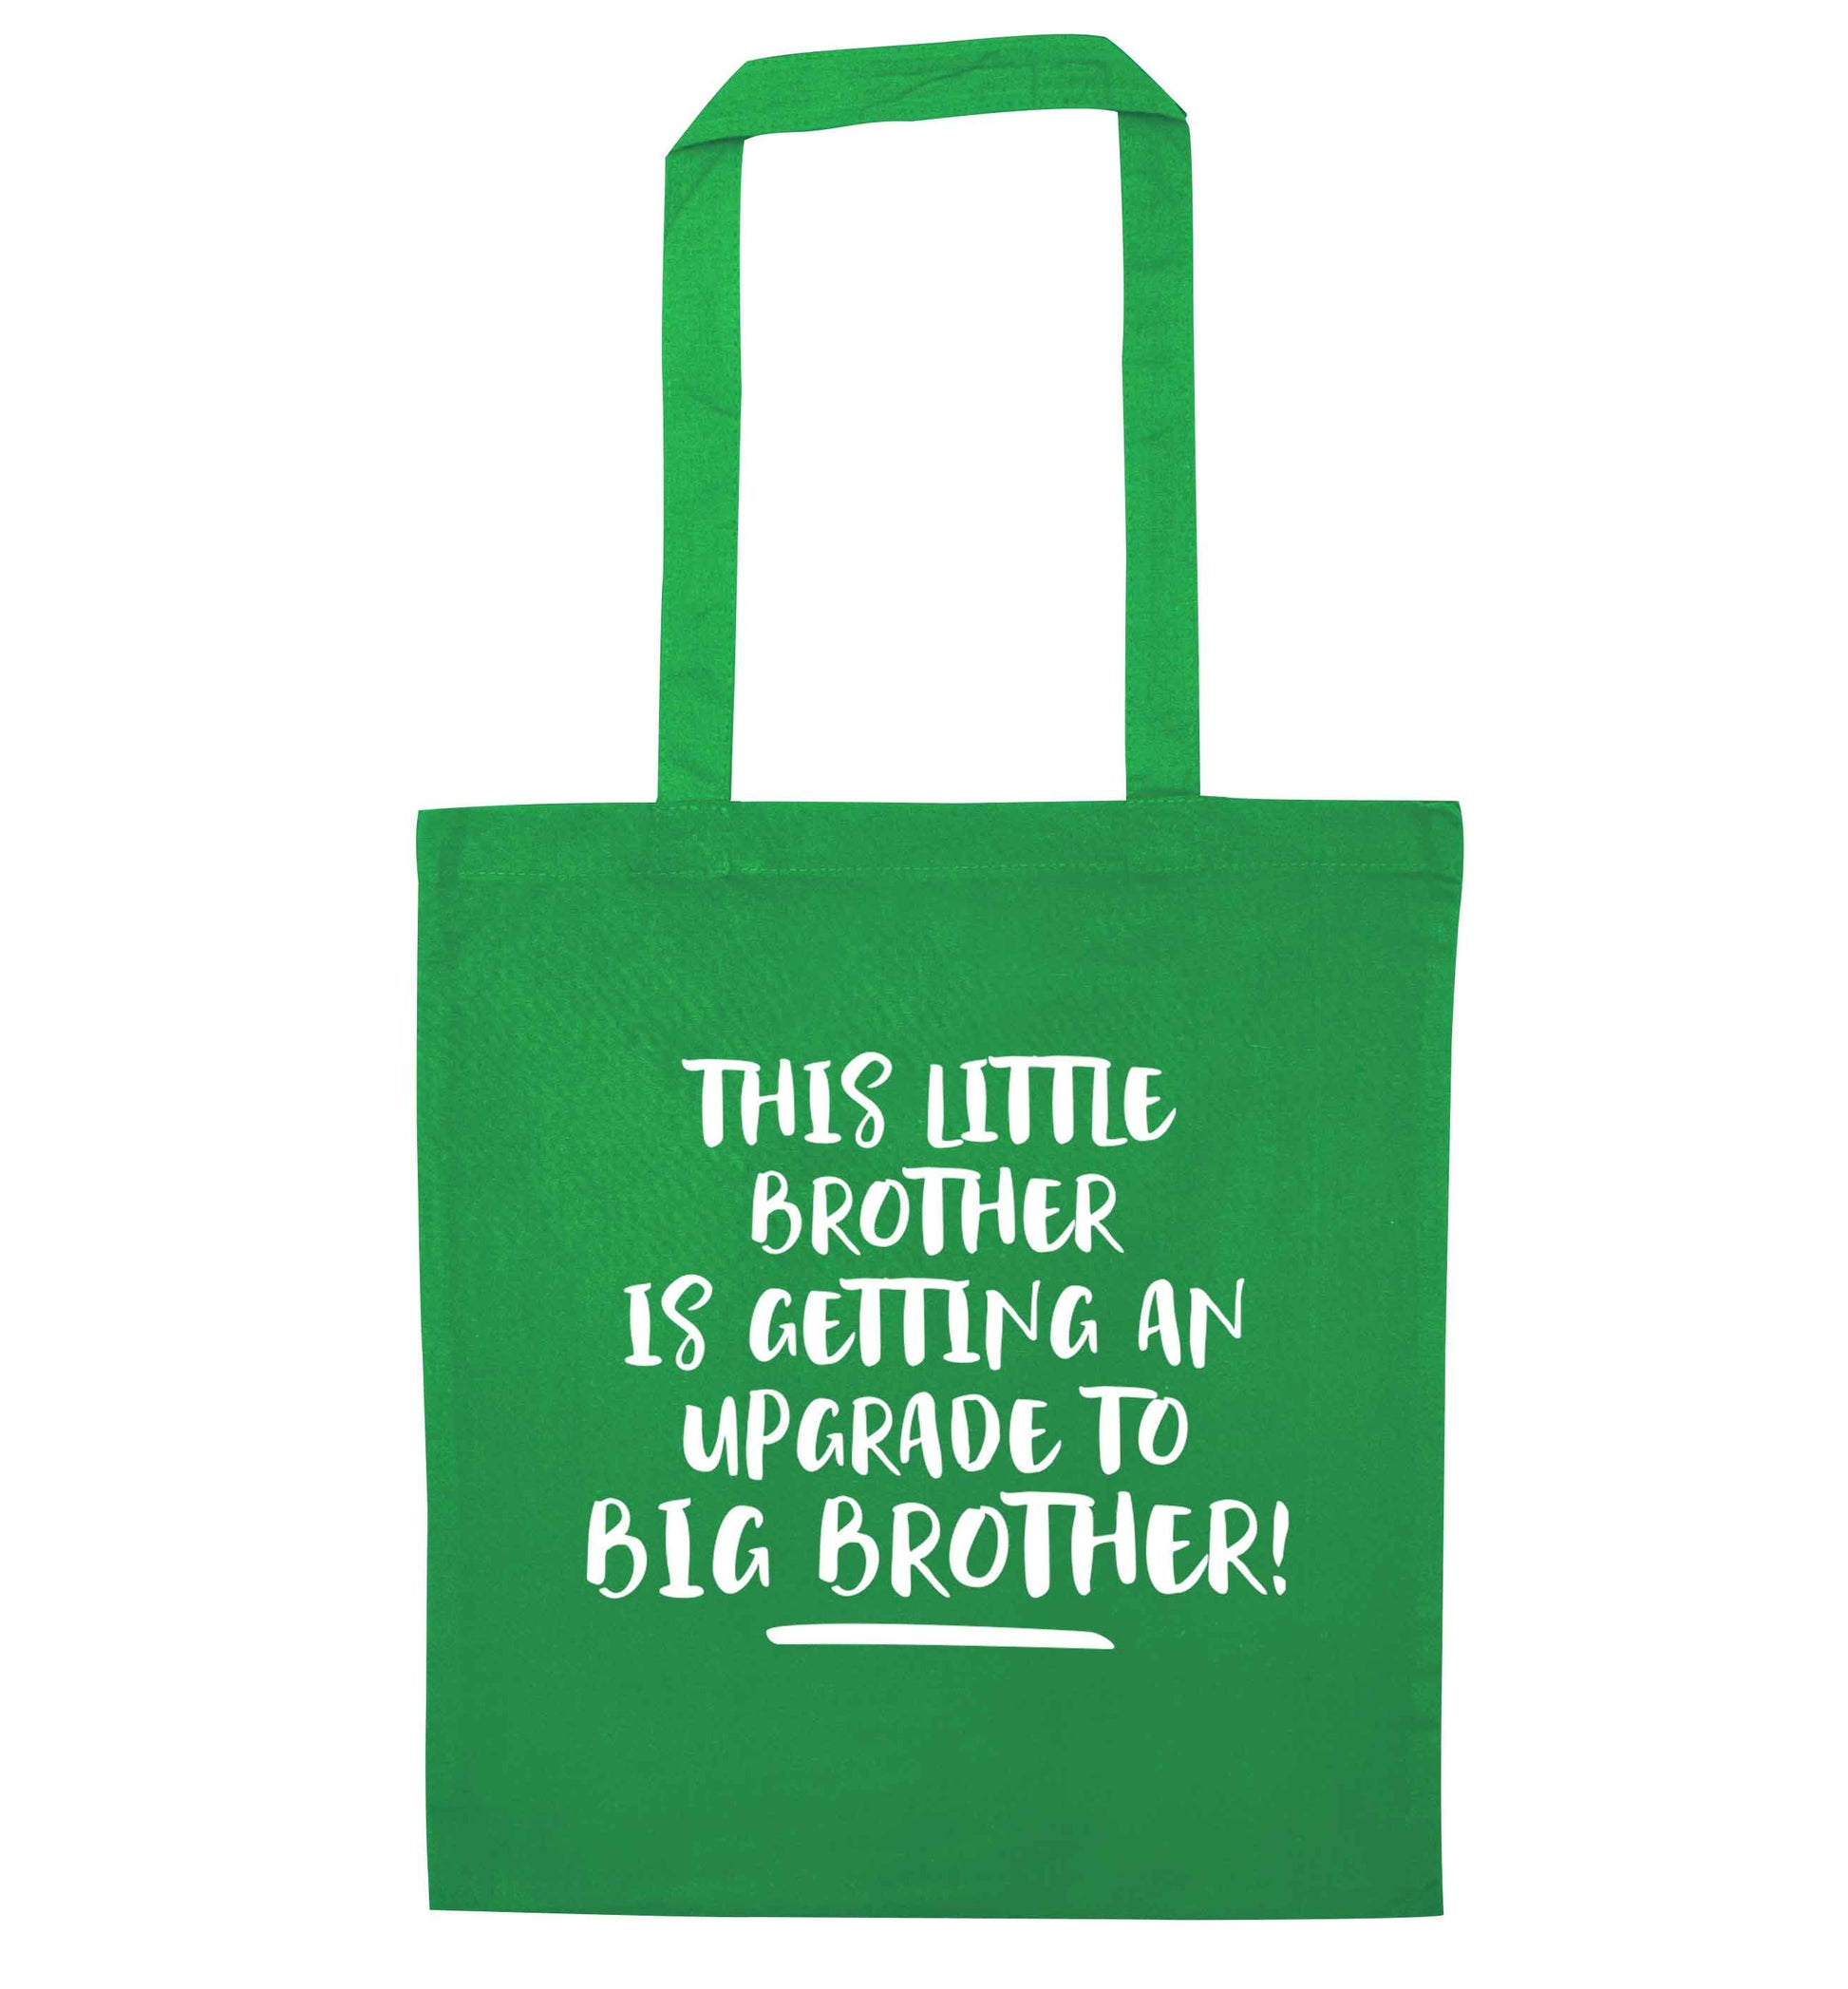 This little brother is getting an upgrade to big brother! green tote bag